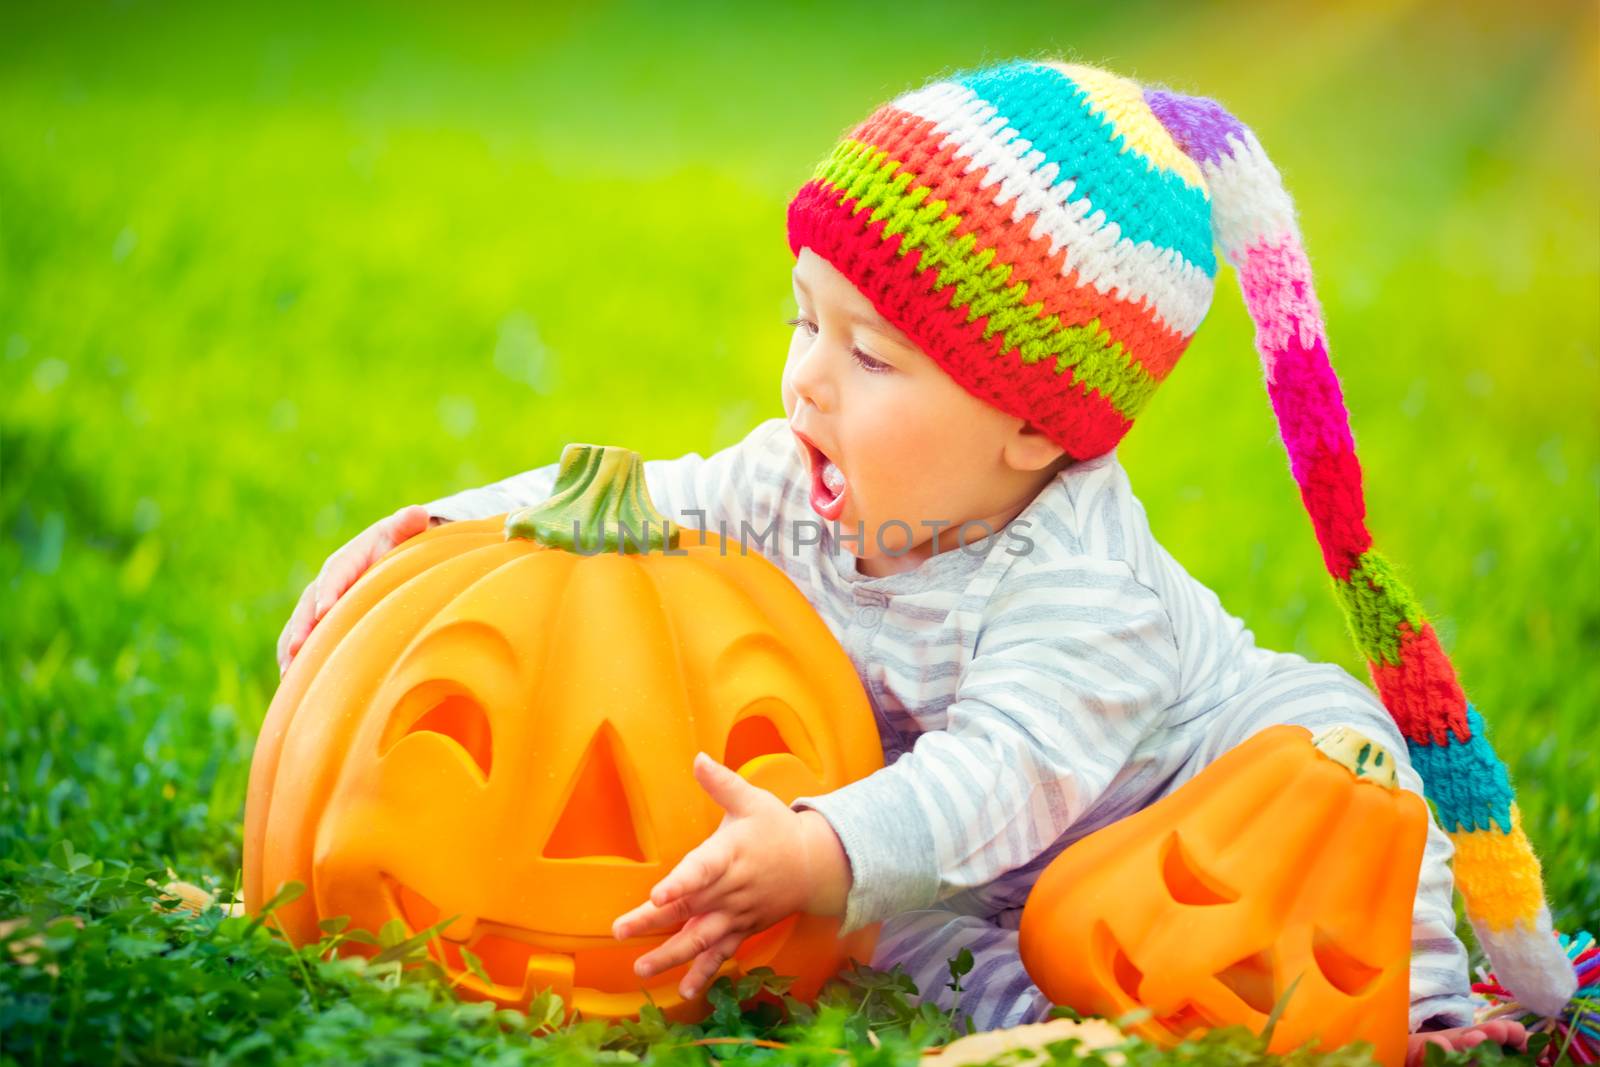 Cute baby with Halloween pumpkins by Anna_Omelchenko